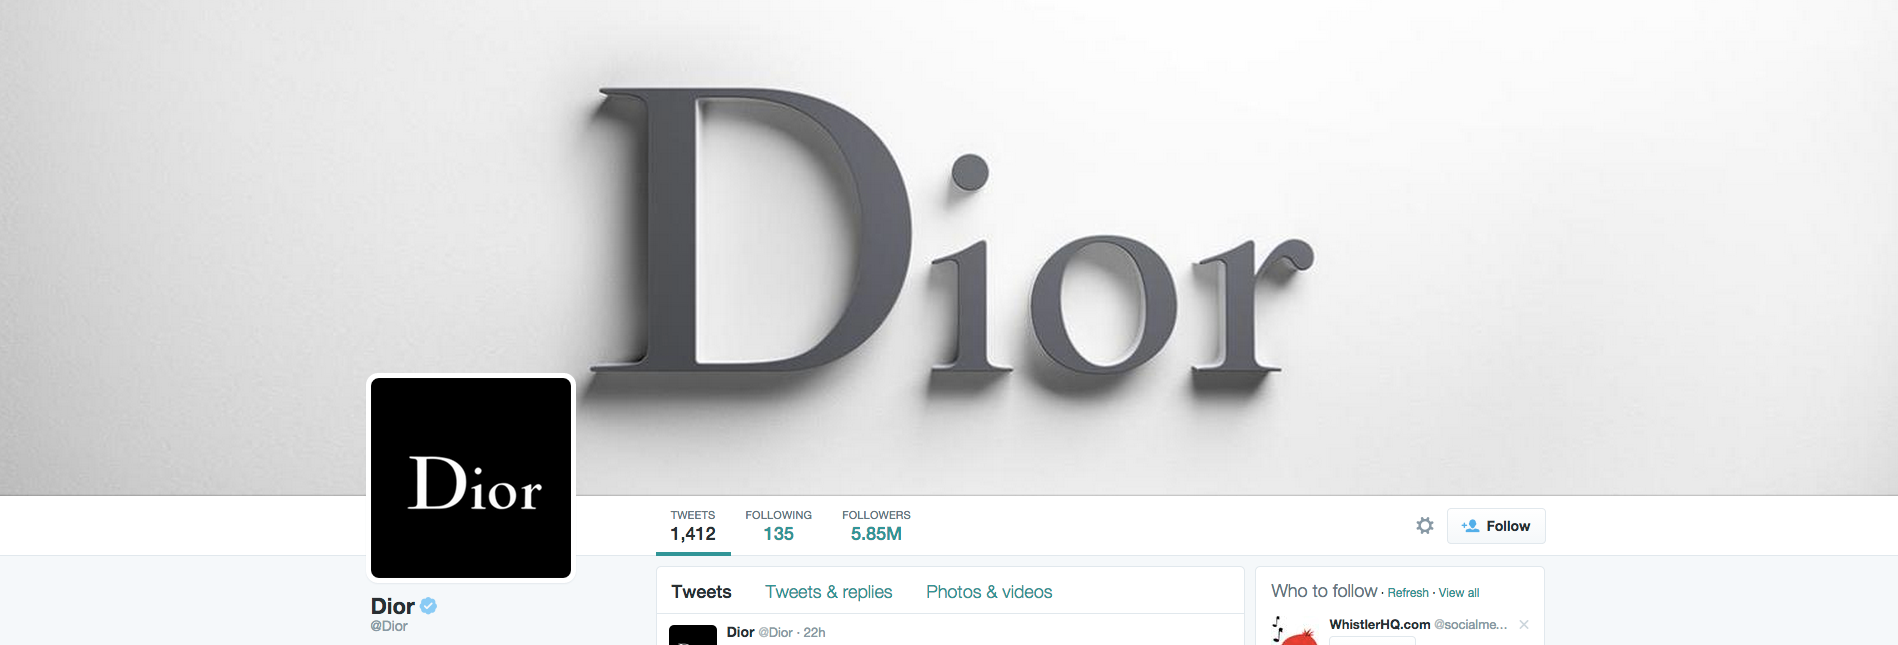 Dior_Twitter.png